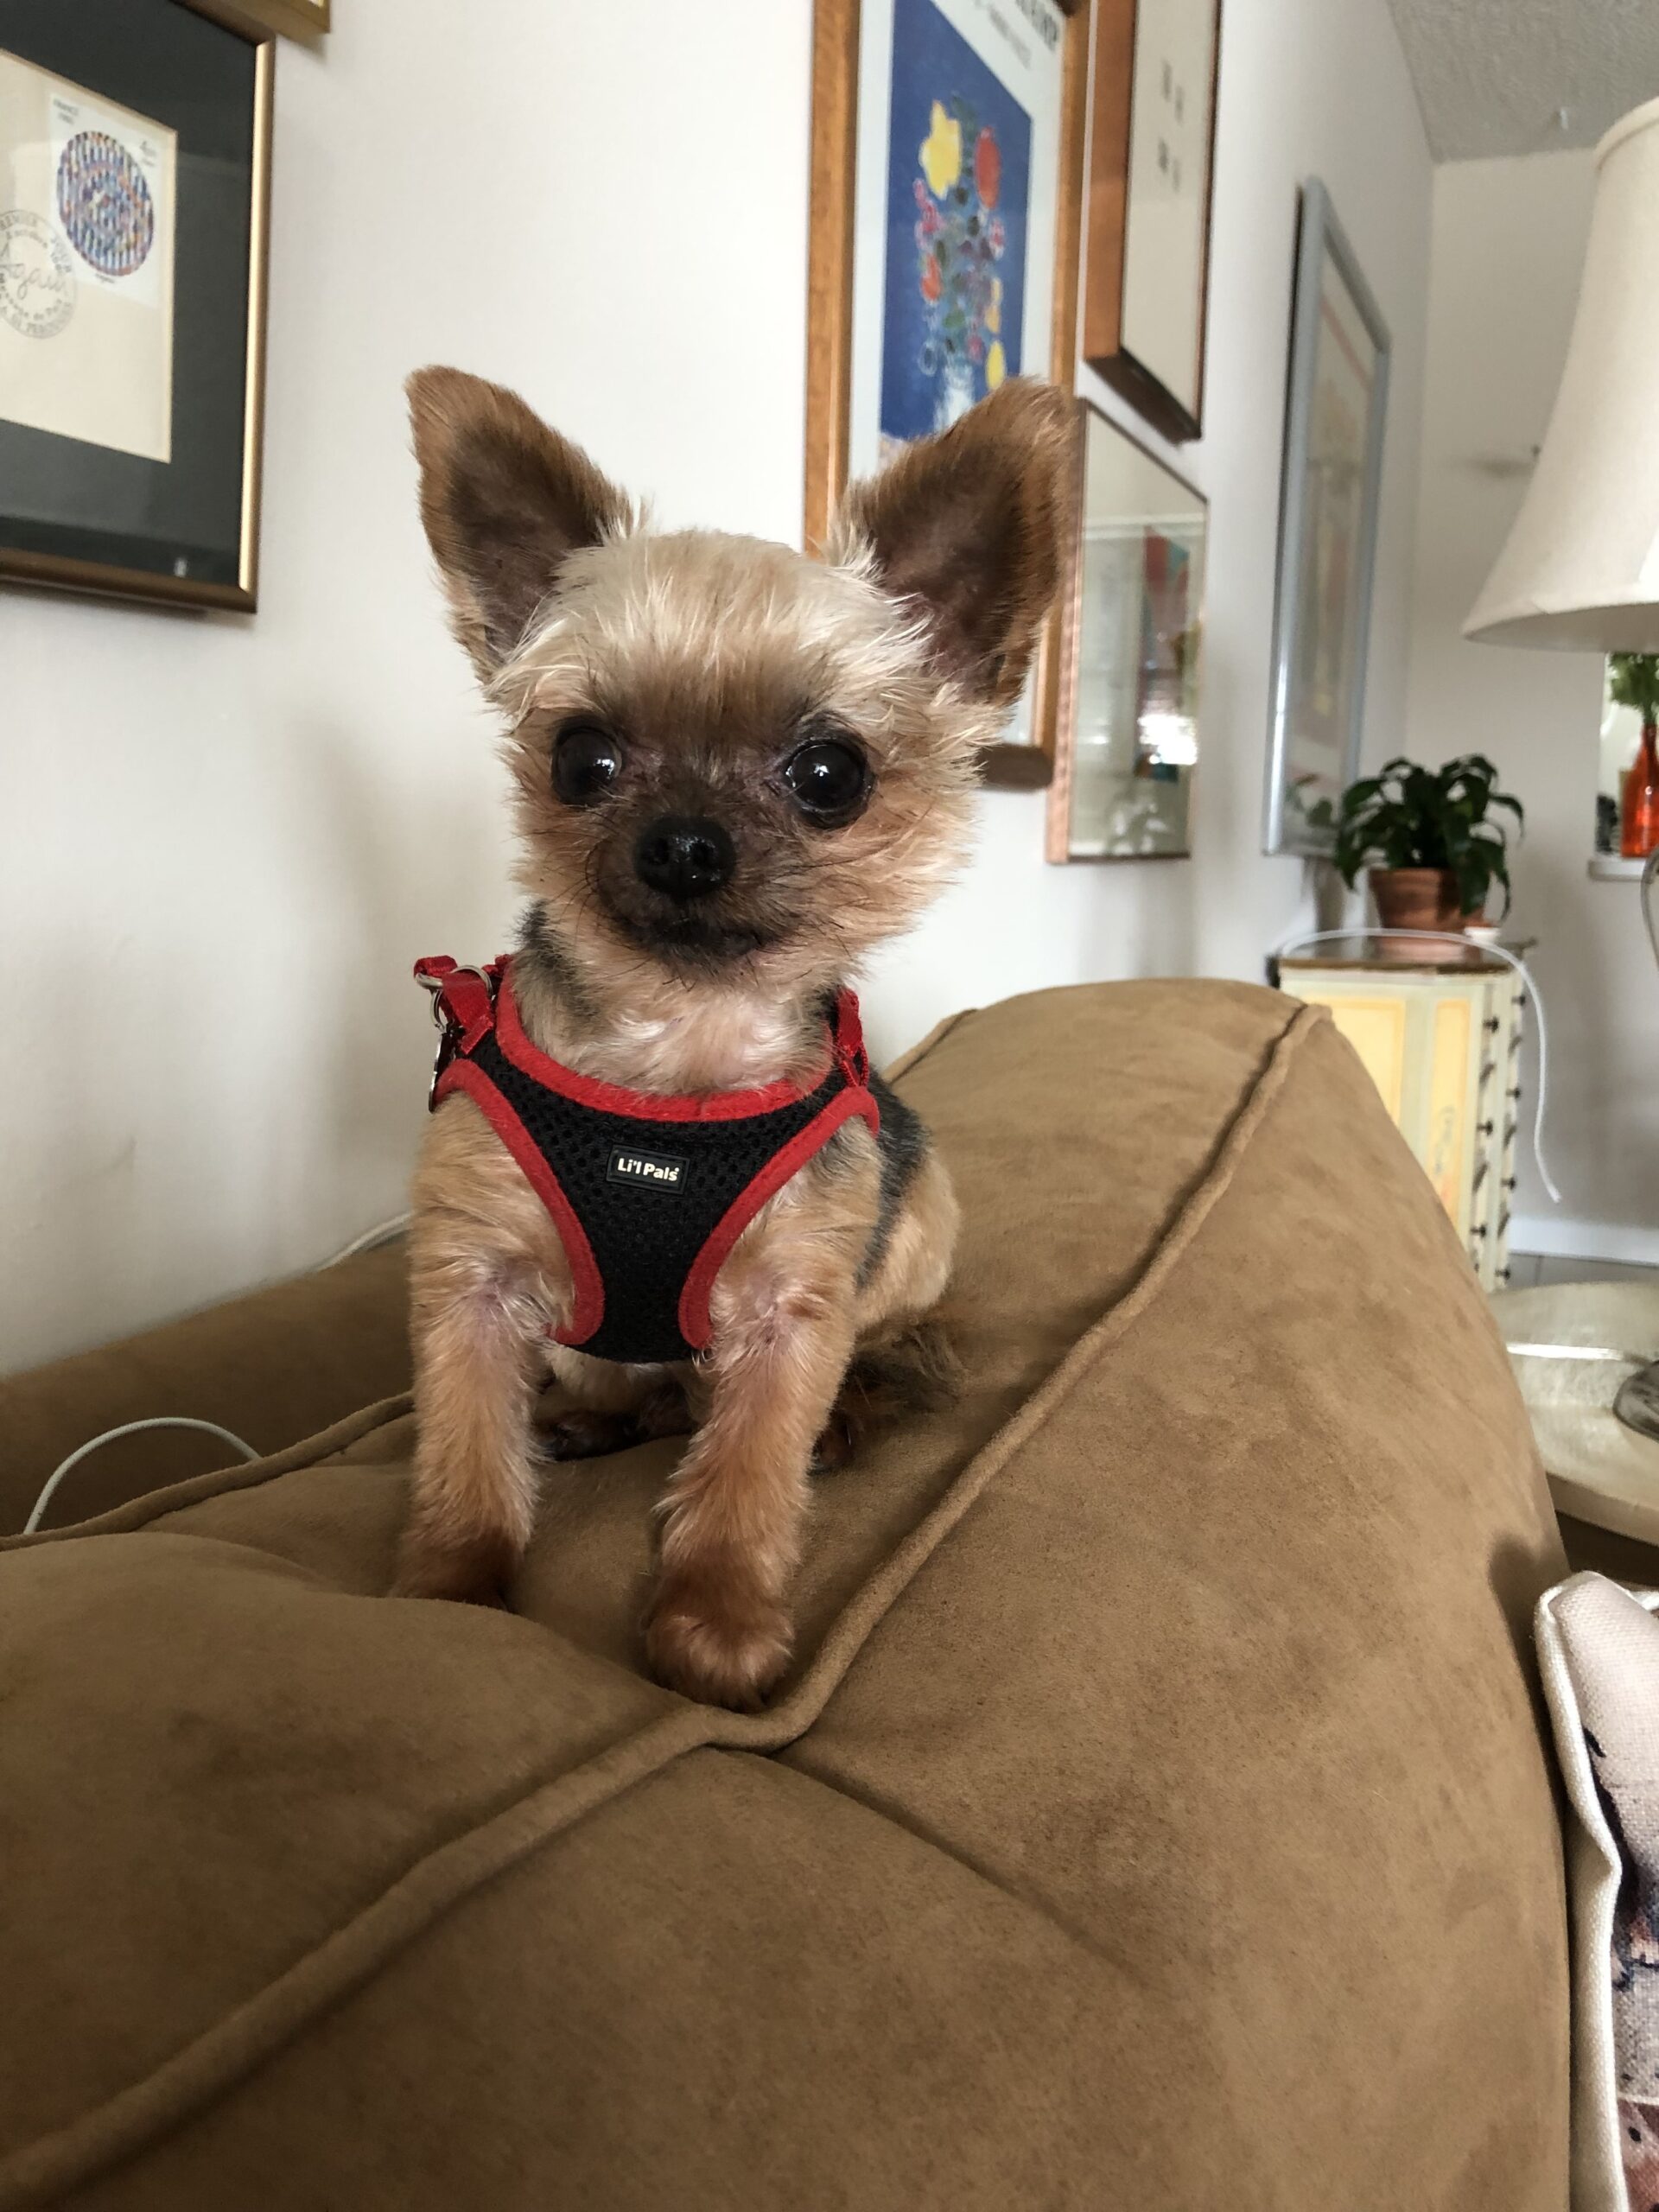 Buddy, who came from a puppy mill, made a full recovery in a loving foster home. COURTESY SOUTHAMPTON ANIMAL SHELTER FOUNDATION